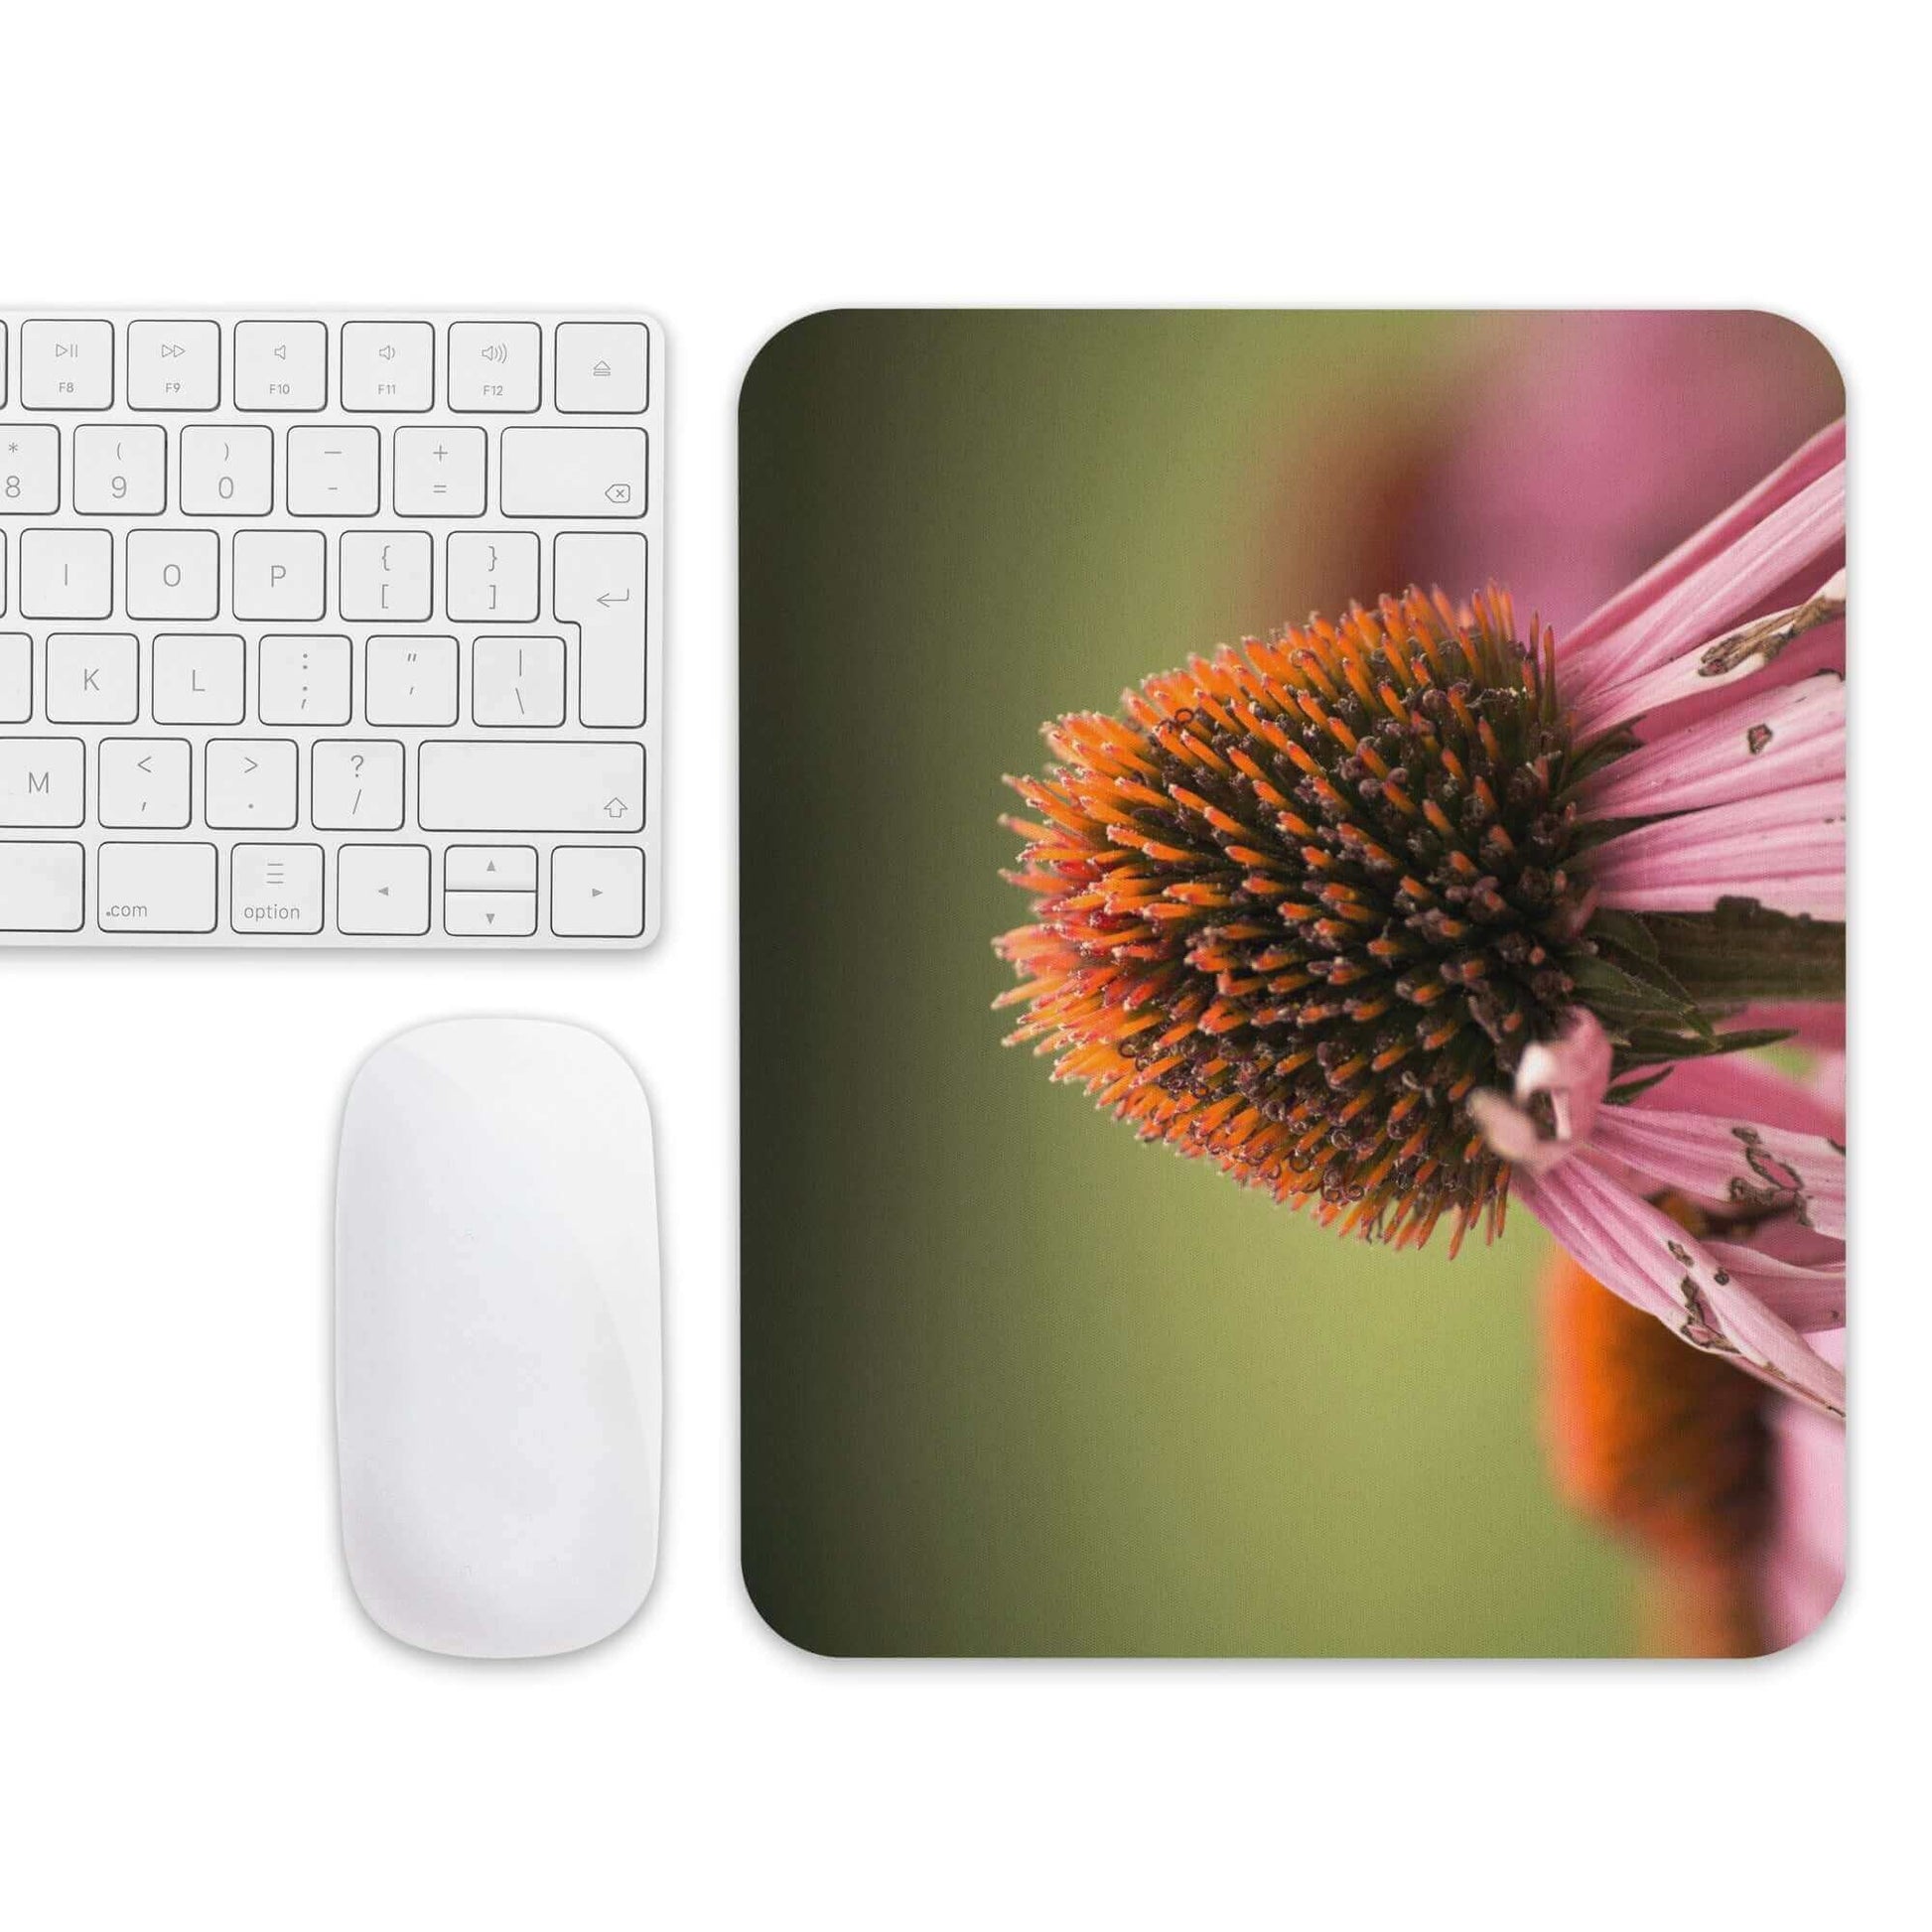 Cone flower up close - Mouse pad close up cone cone flower flower mouse pad nature zoom